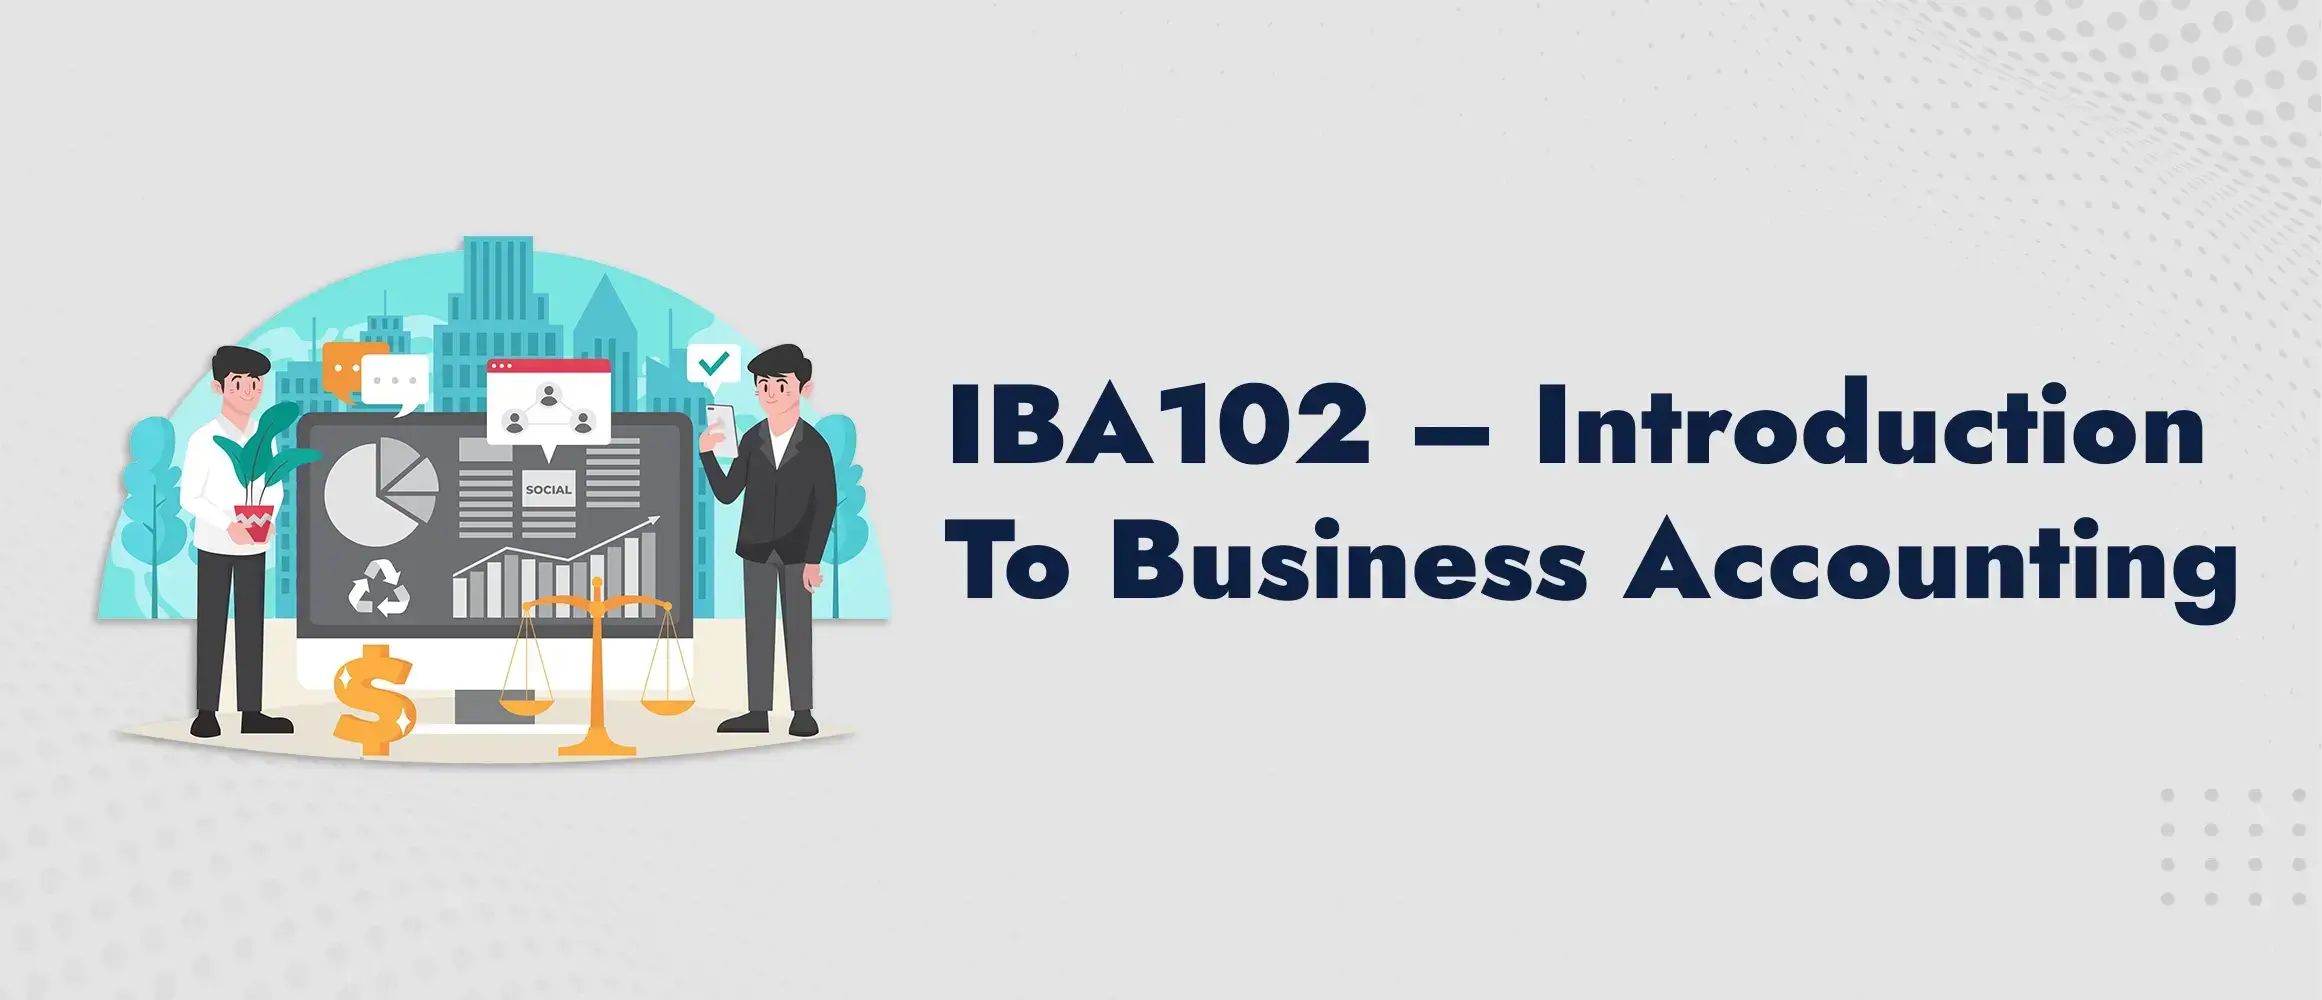 IBA102 – INTRODUCTION TO BUSINESS ACCOUNTING